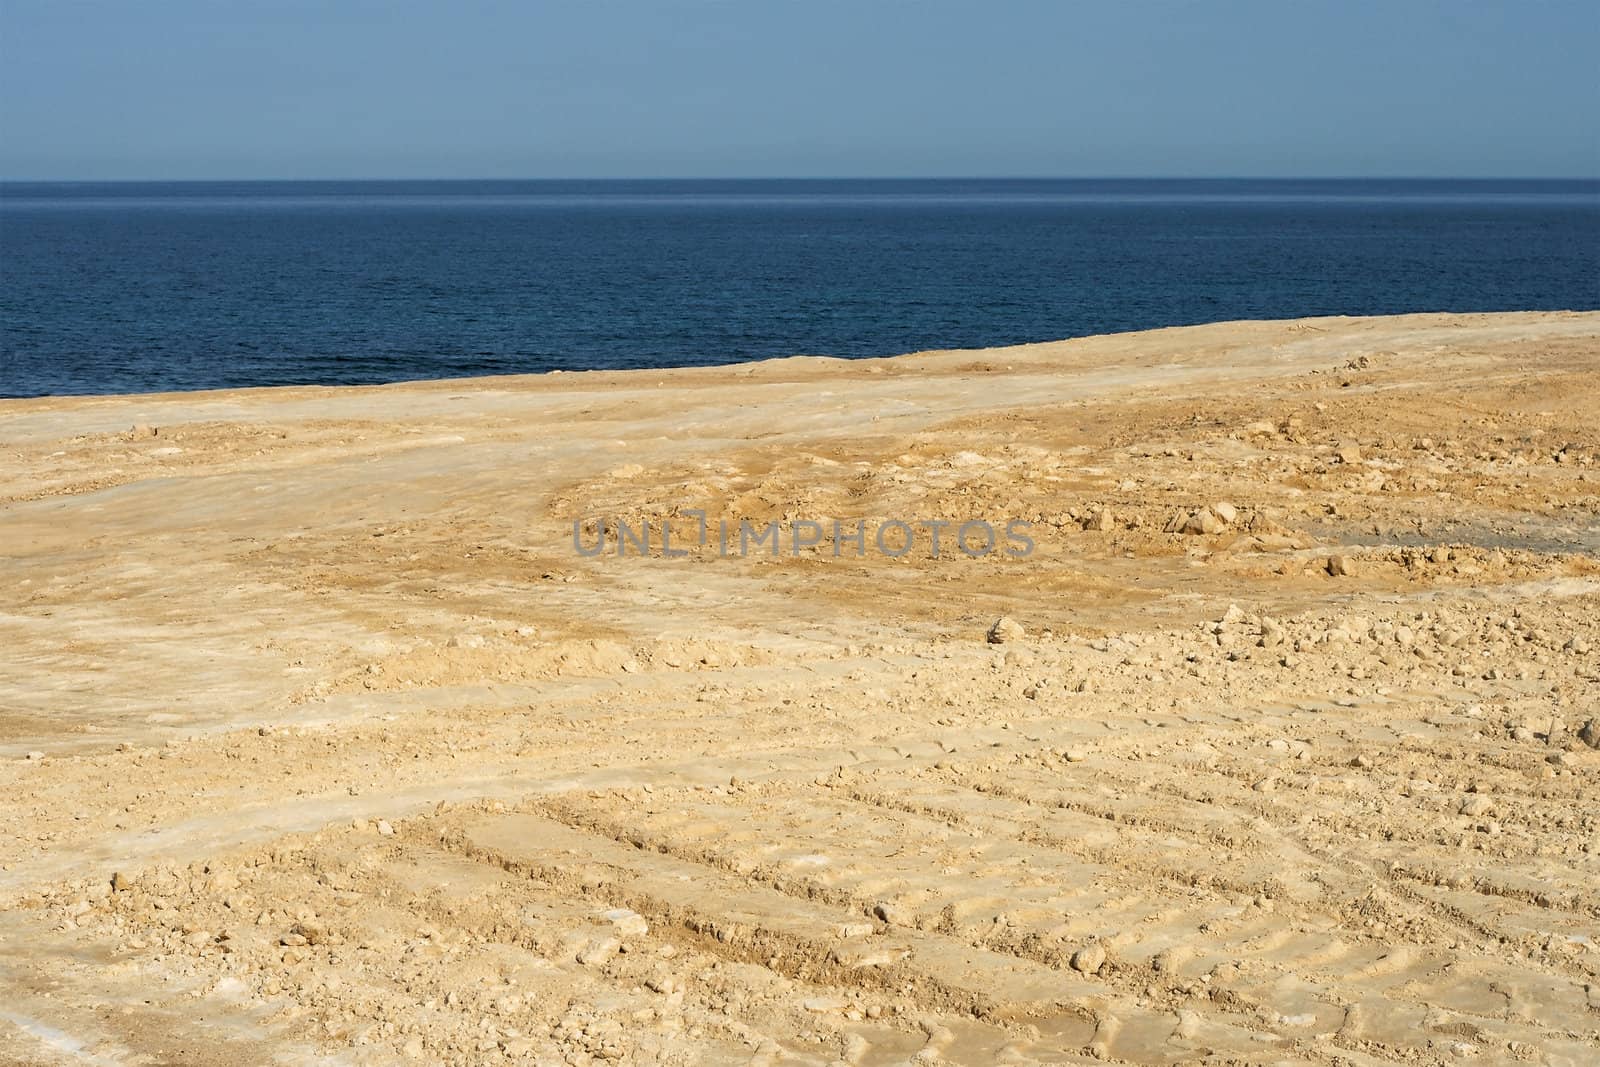 Scenic background of a beautiful empty sandy beach with tracks lit by the sun overlooking a blue tropical ocean